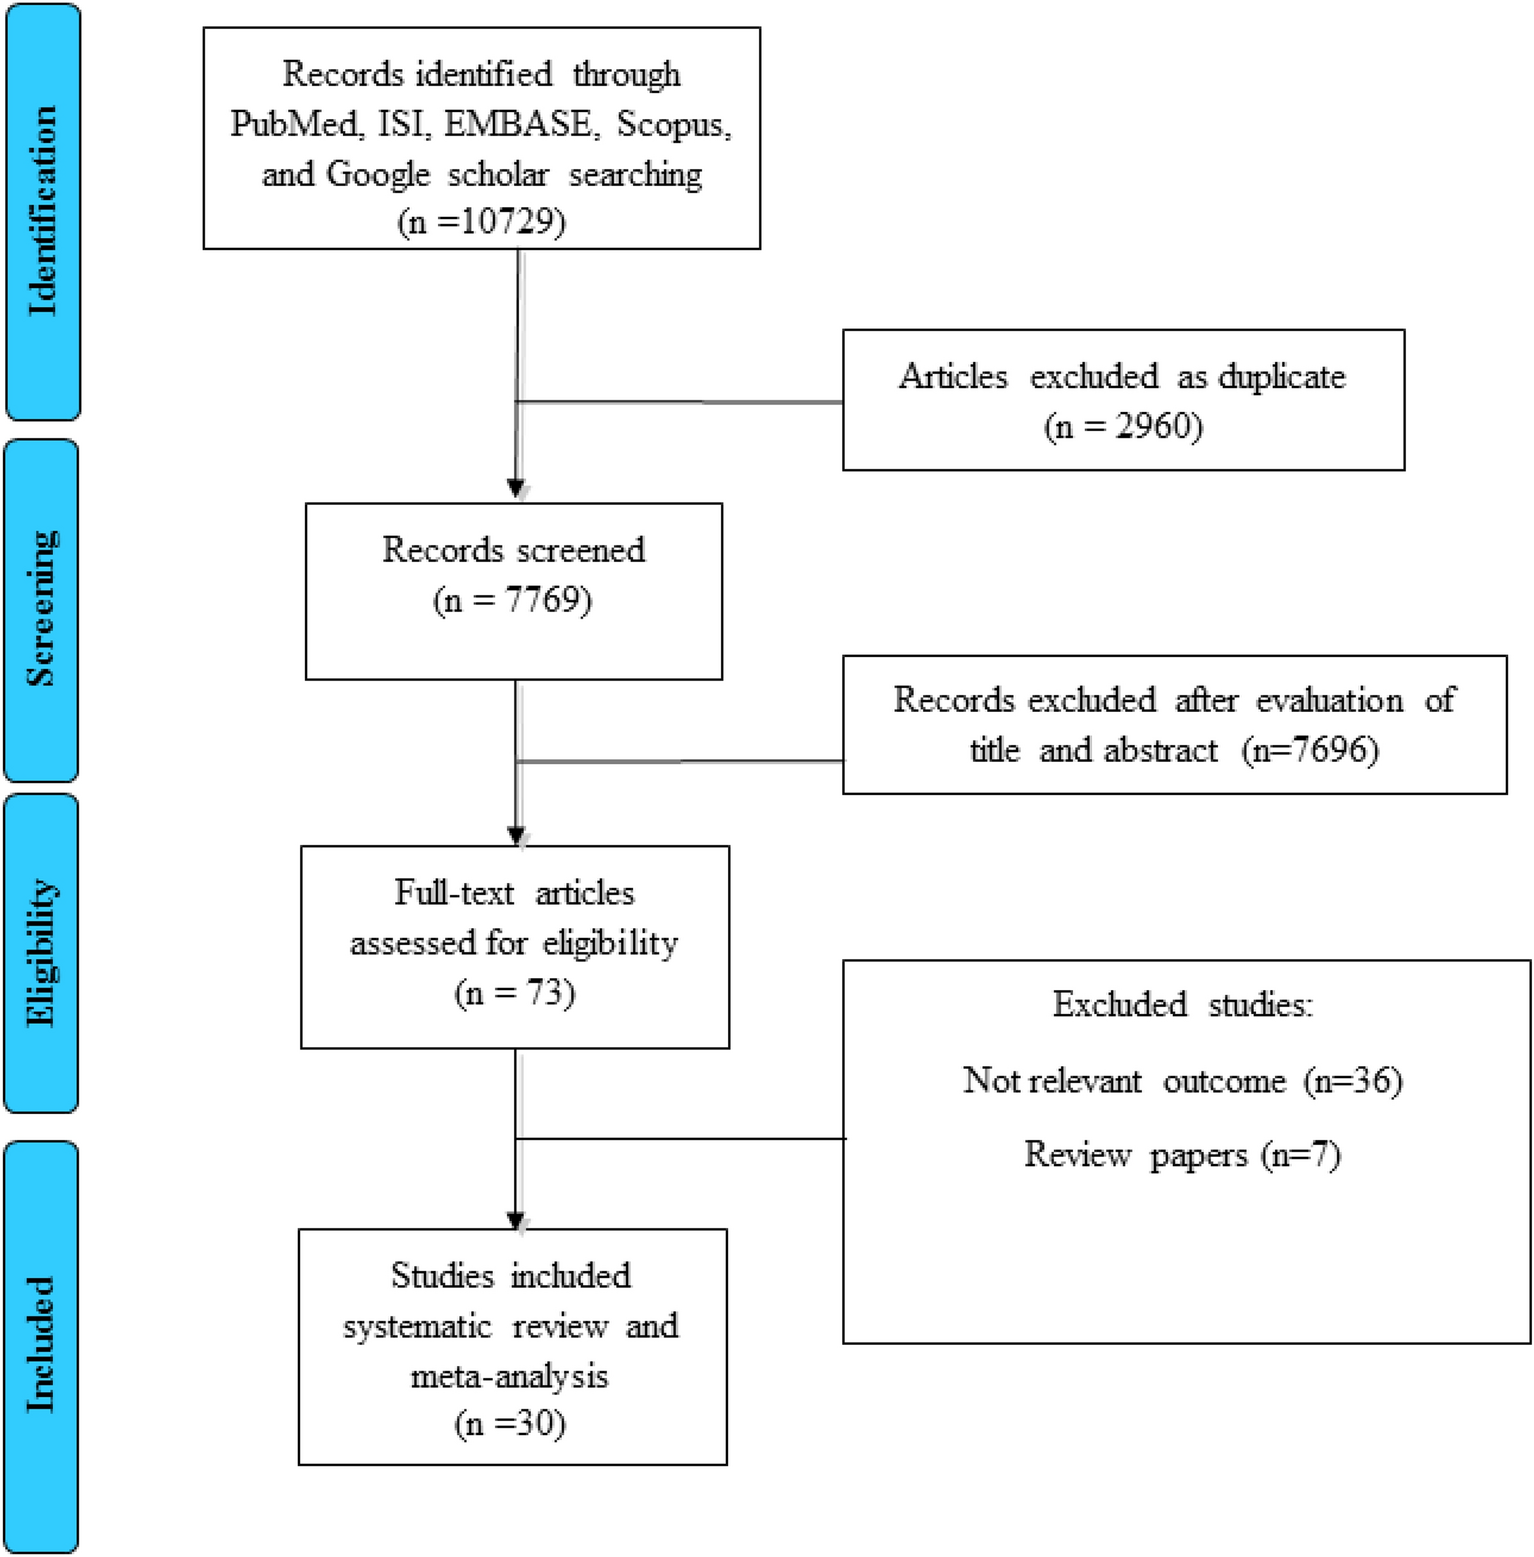 Association of maternal exposure to endocrine disruptor chemicals with cardio-metabolic risk factors in children during childhood: a systematic review and meta-analysis of cohort studies